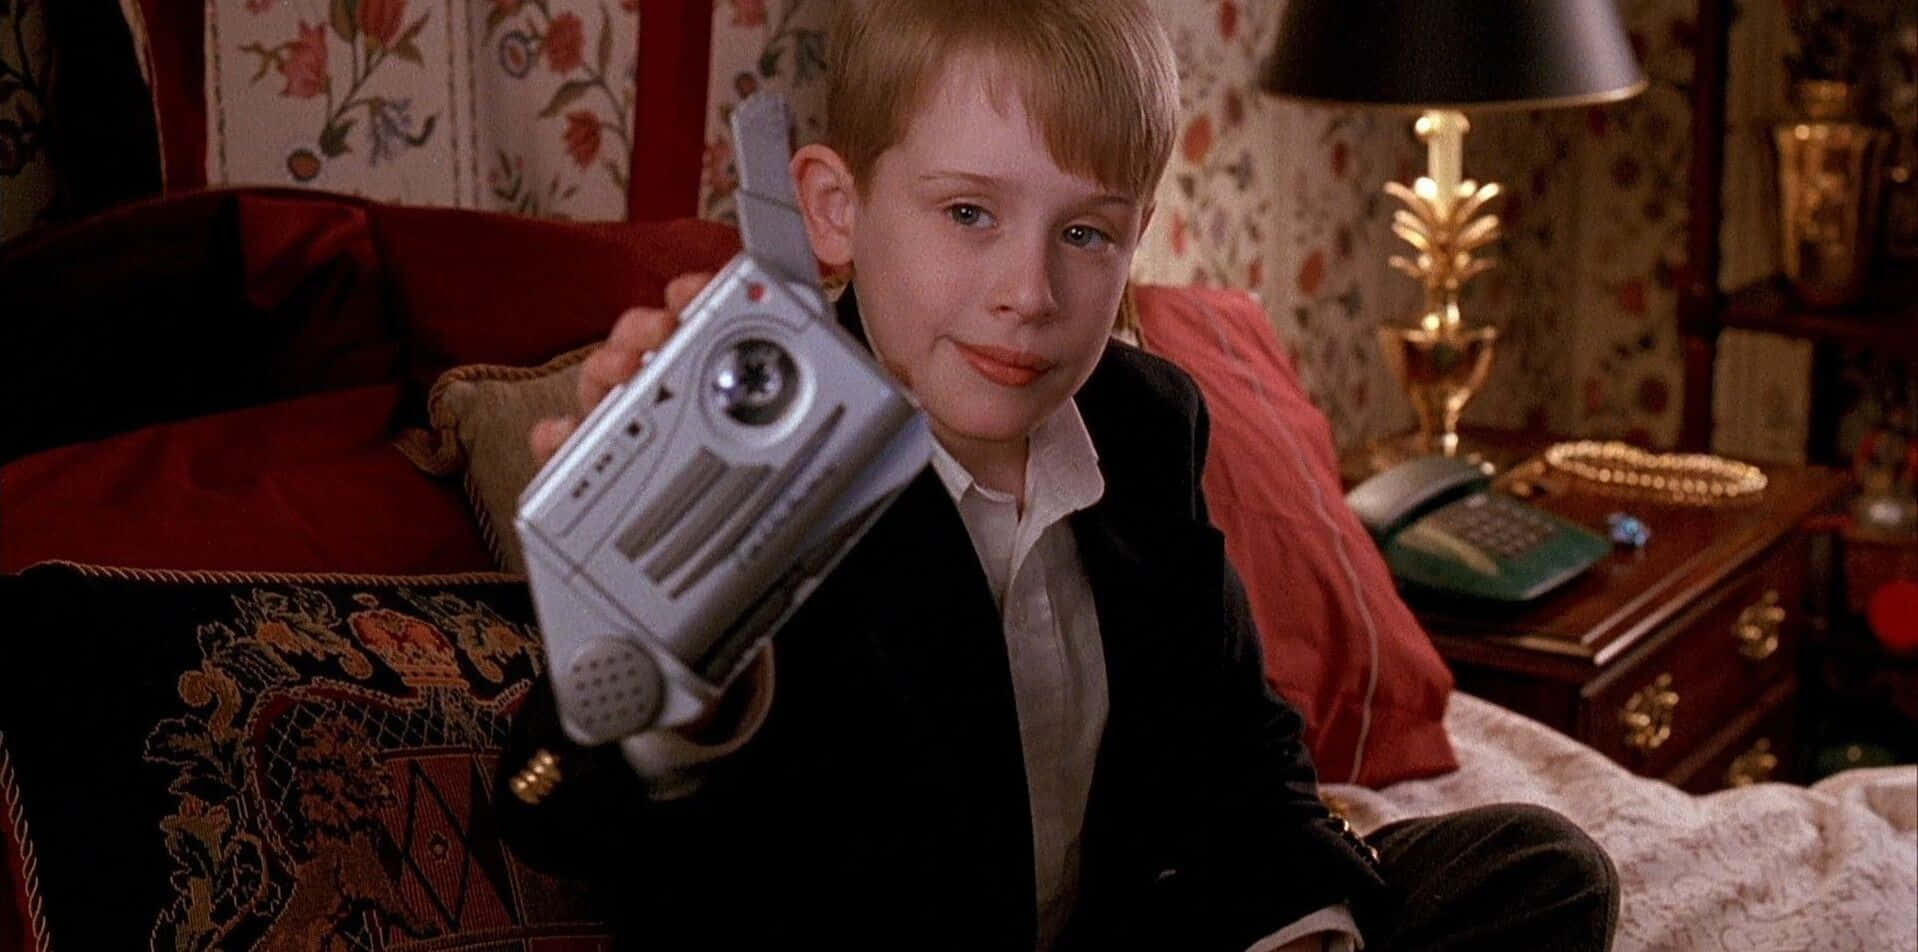 A Young Boy Holding A Remote Control In His Hands